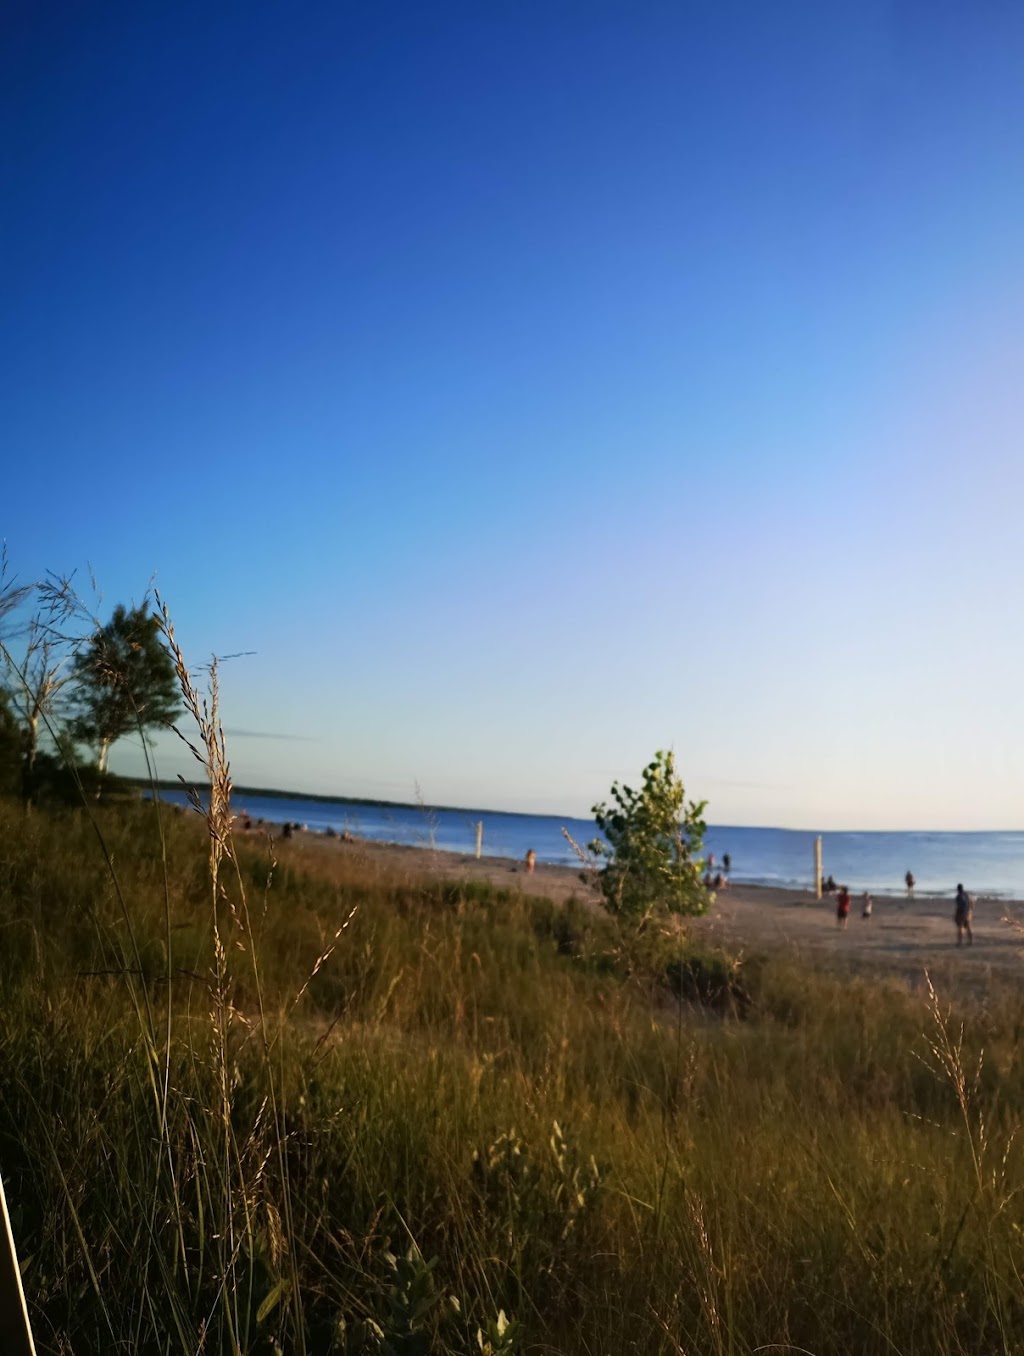 Beachside Cottages | 114 2nd Ave N, Sauble Beach, ON N0H 2G0, Canada | Phone: (519) 422-2059